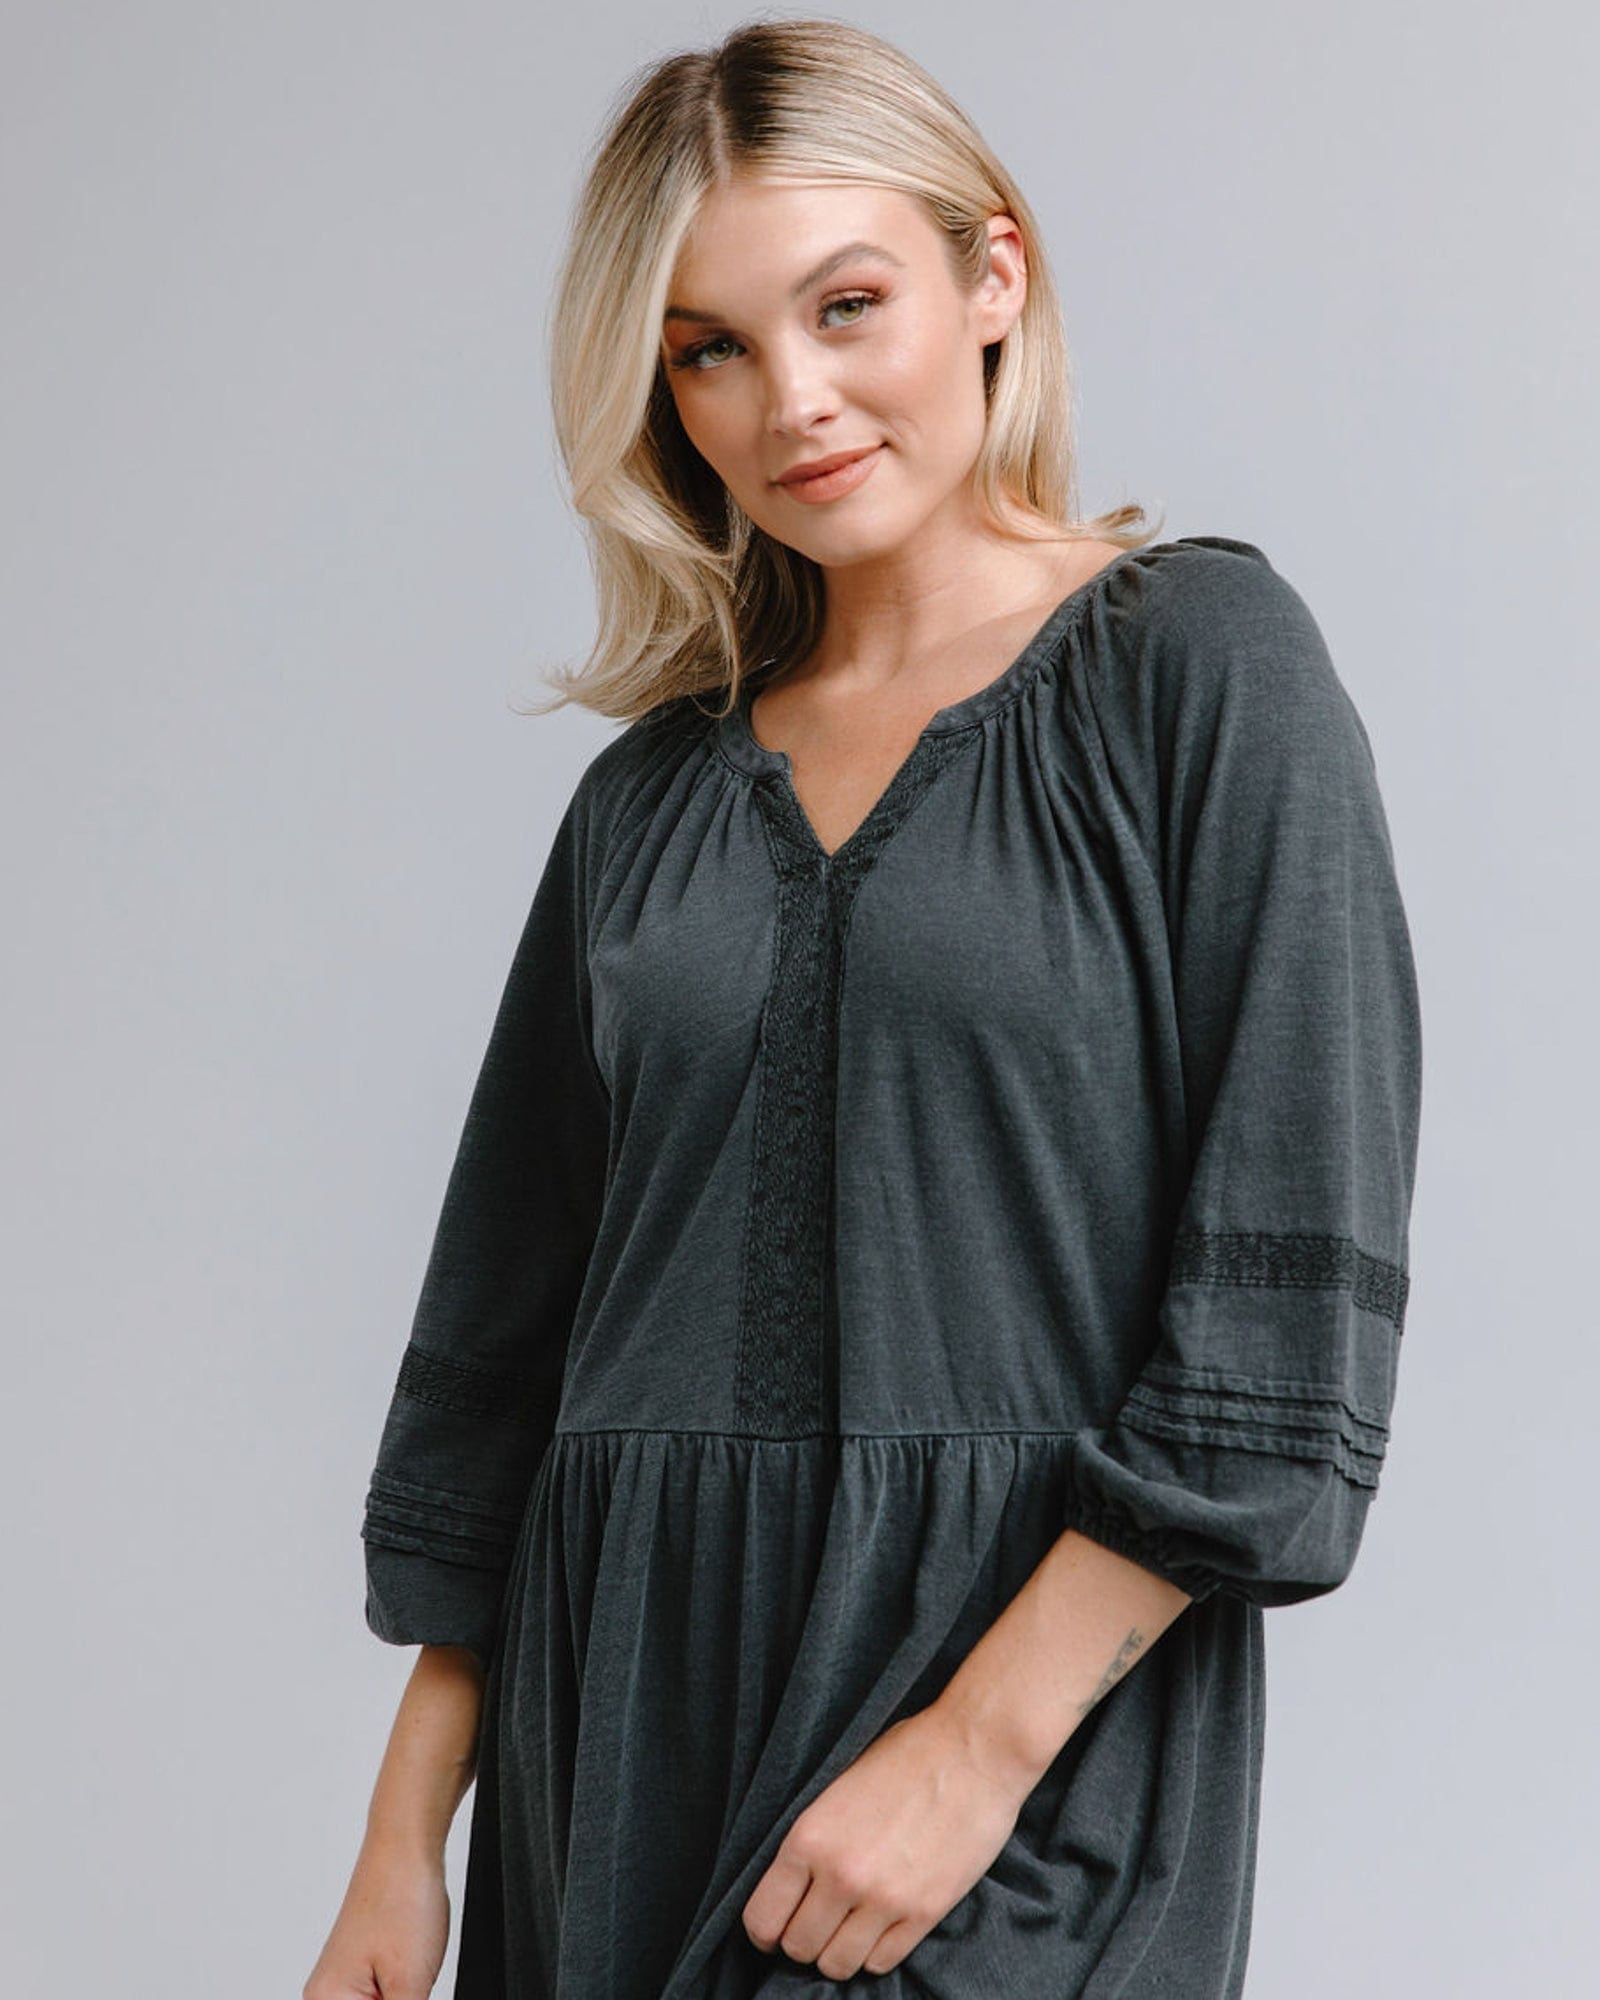 Woman in a 3/4 sleeve, knee-length, gray dress with lace detail around neckline